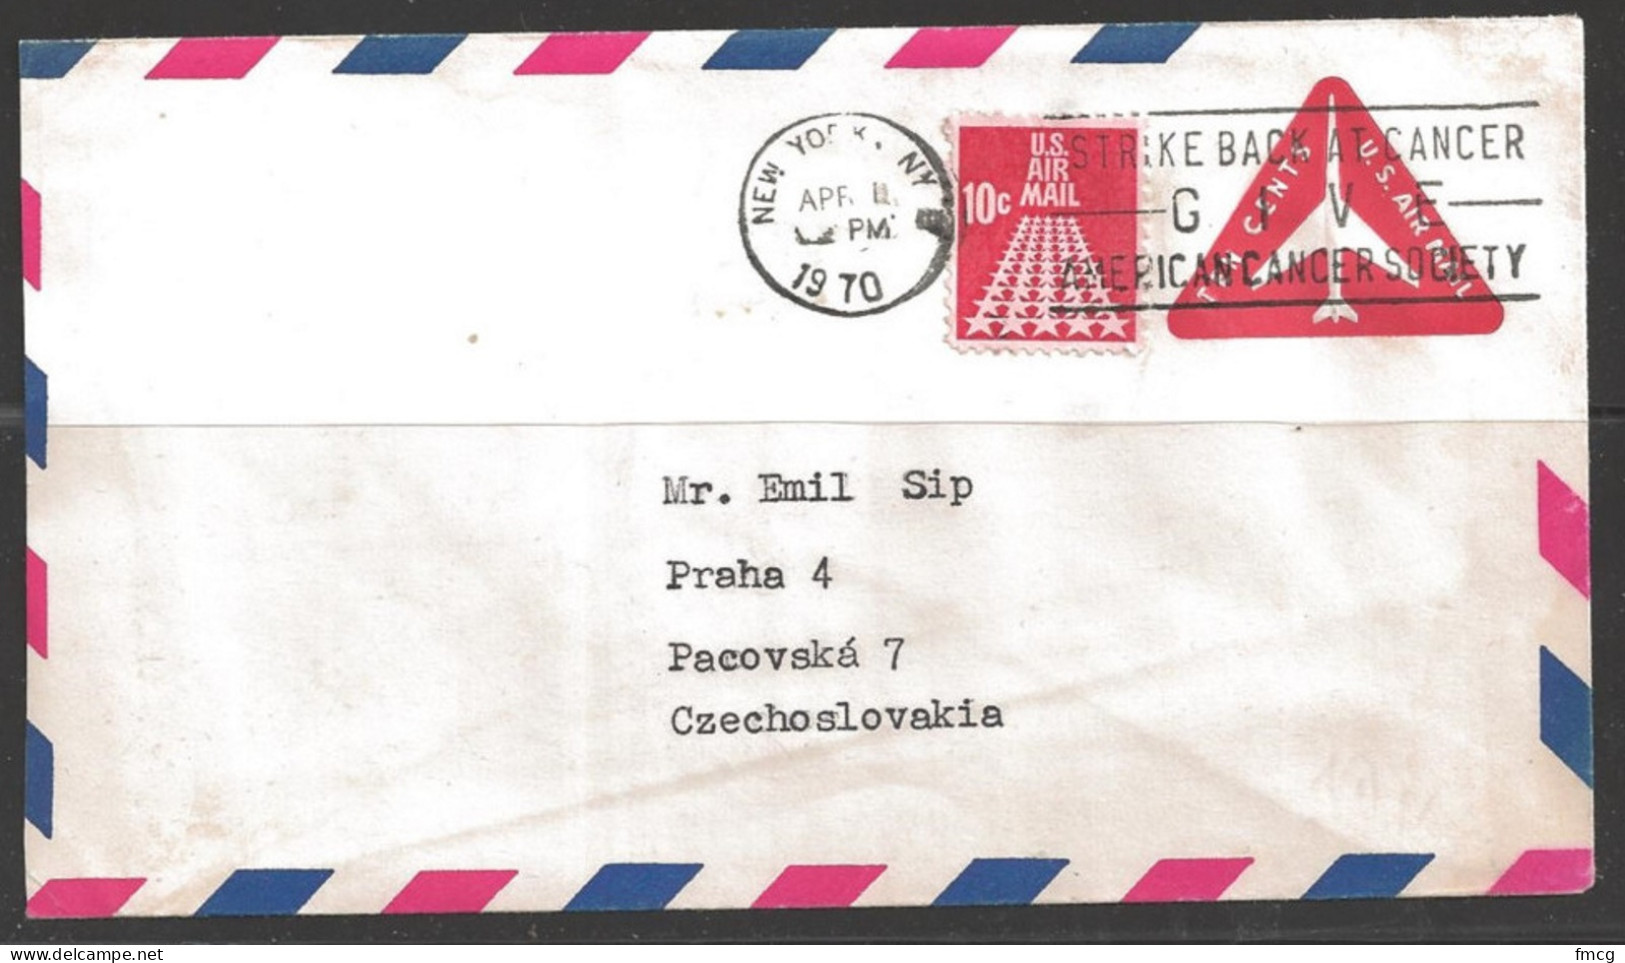 1970 10 Cents Runway Airmail On Airmail Envelope To Czechoslovakia (Apr 11) - Covers & Documents